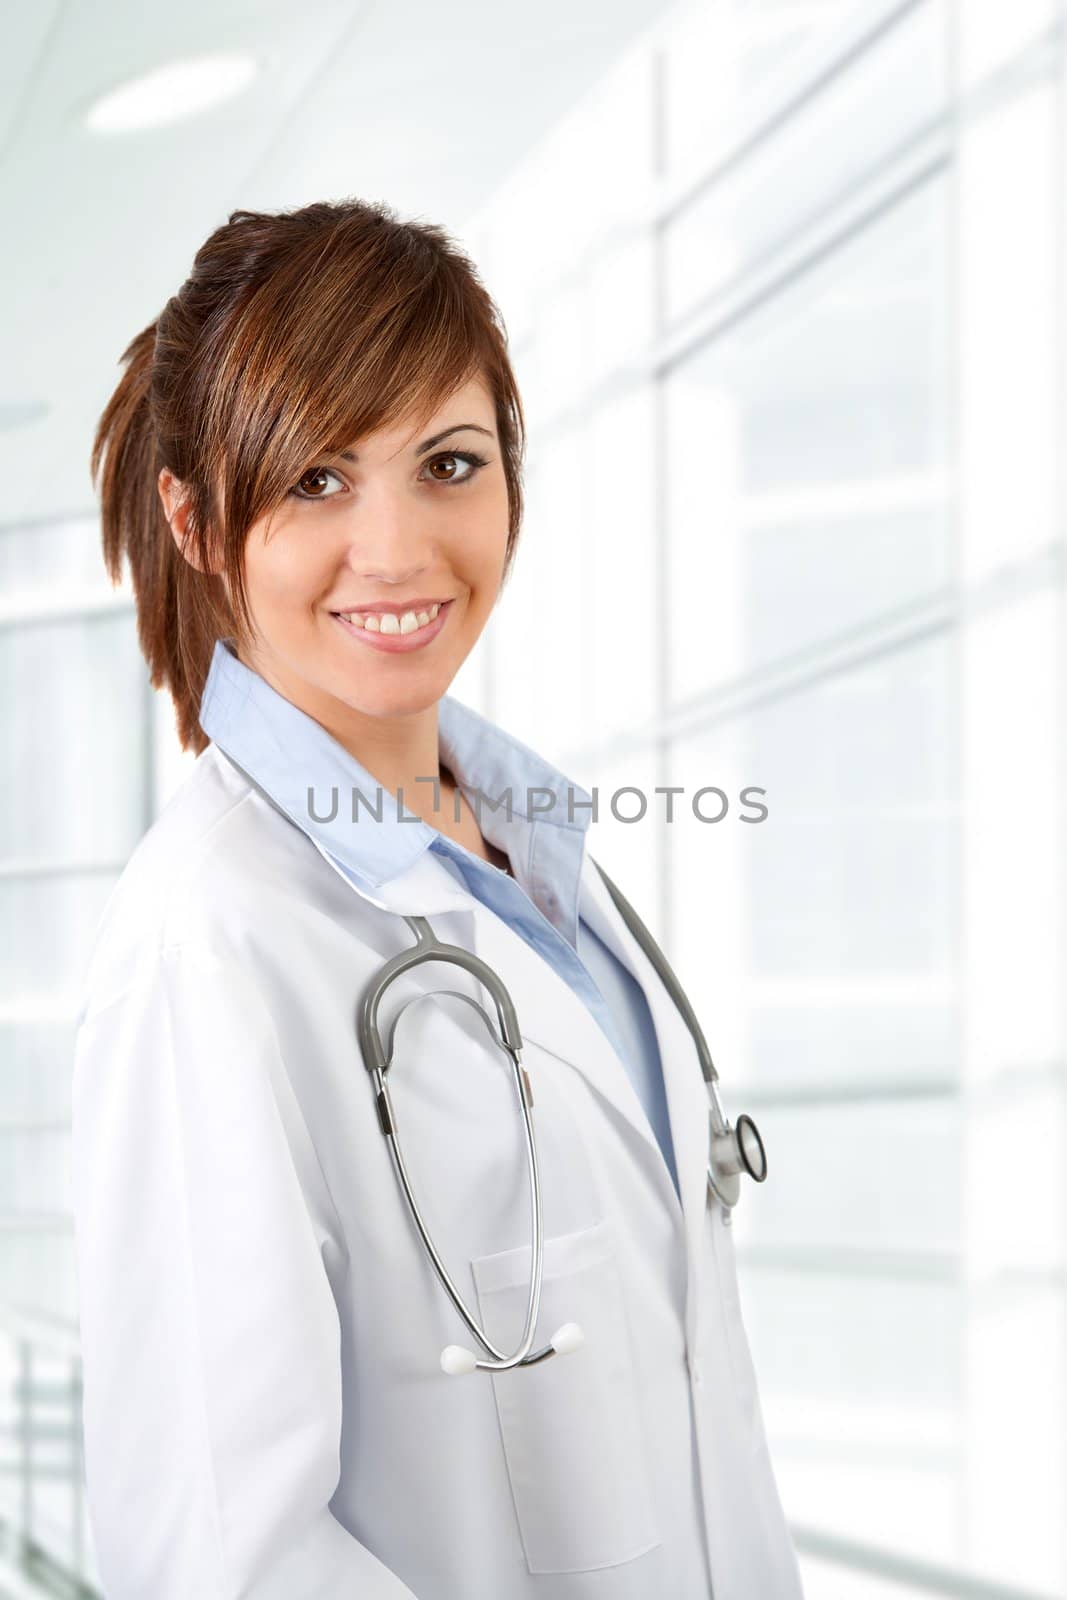 Portrait of female doctor with stethoscope in hospital. by karelnoppe